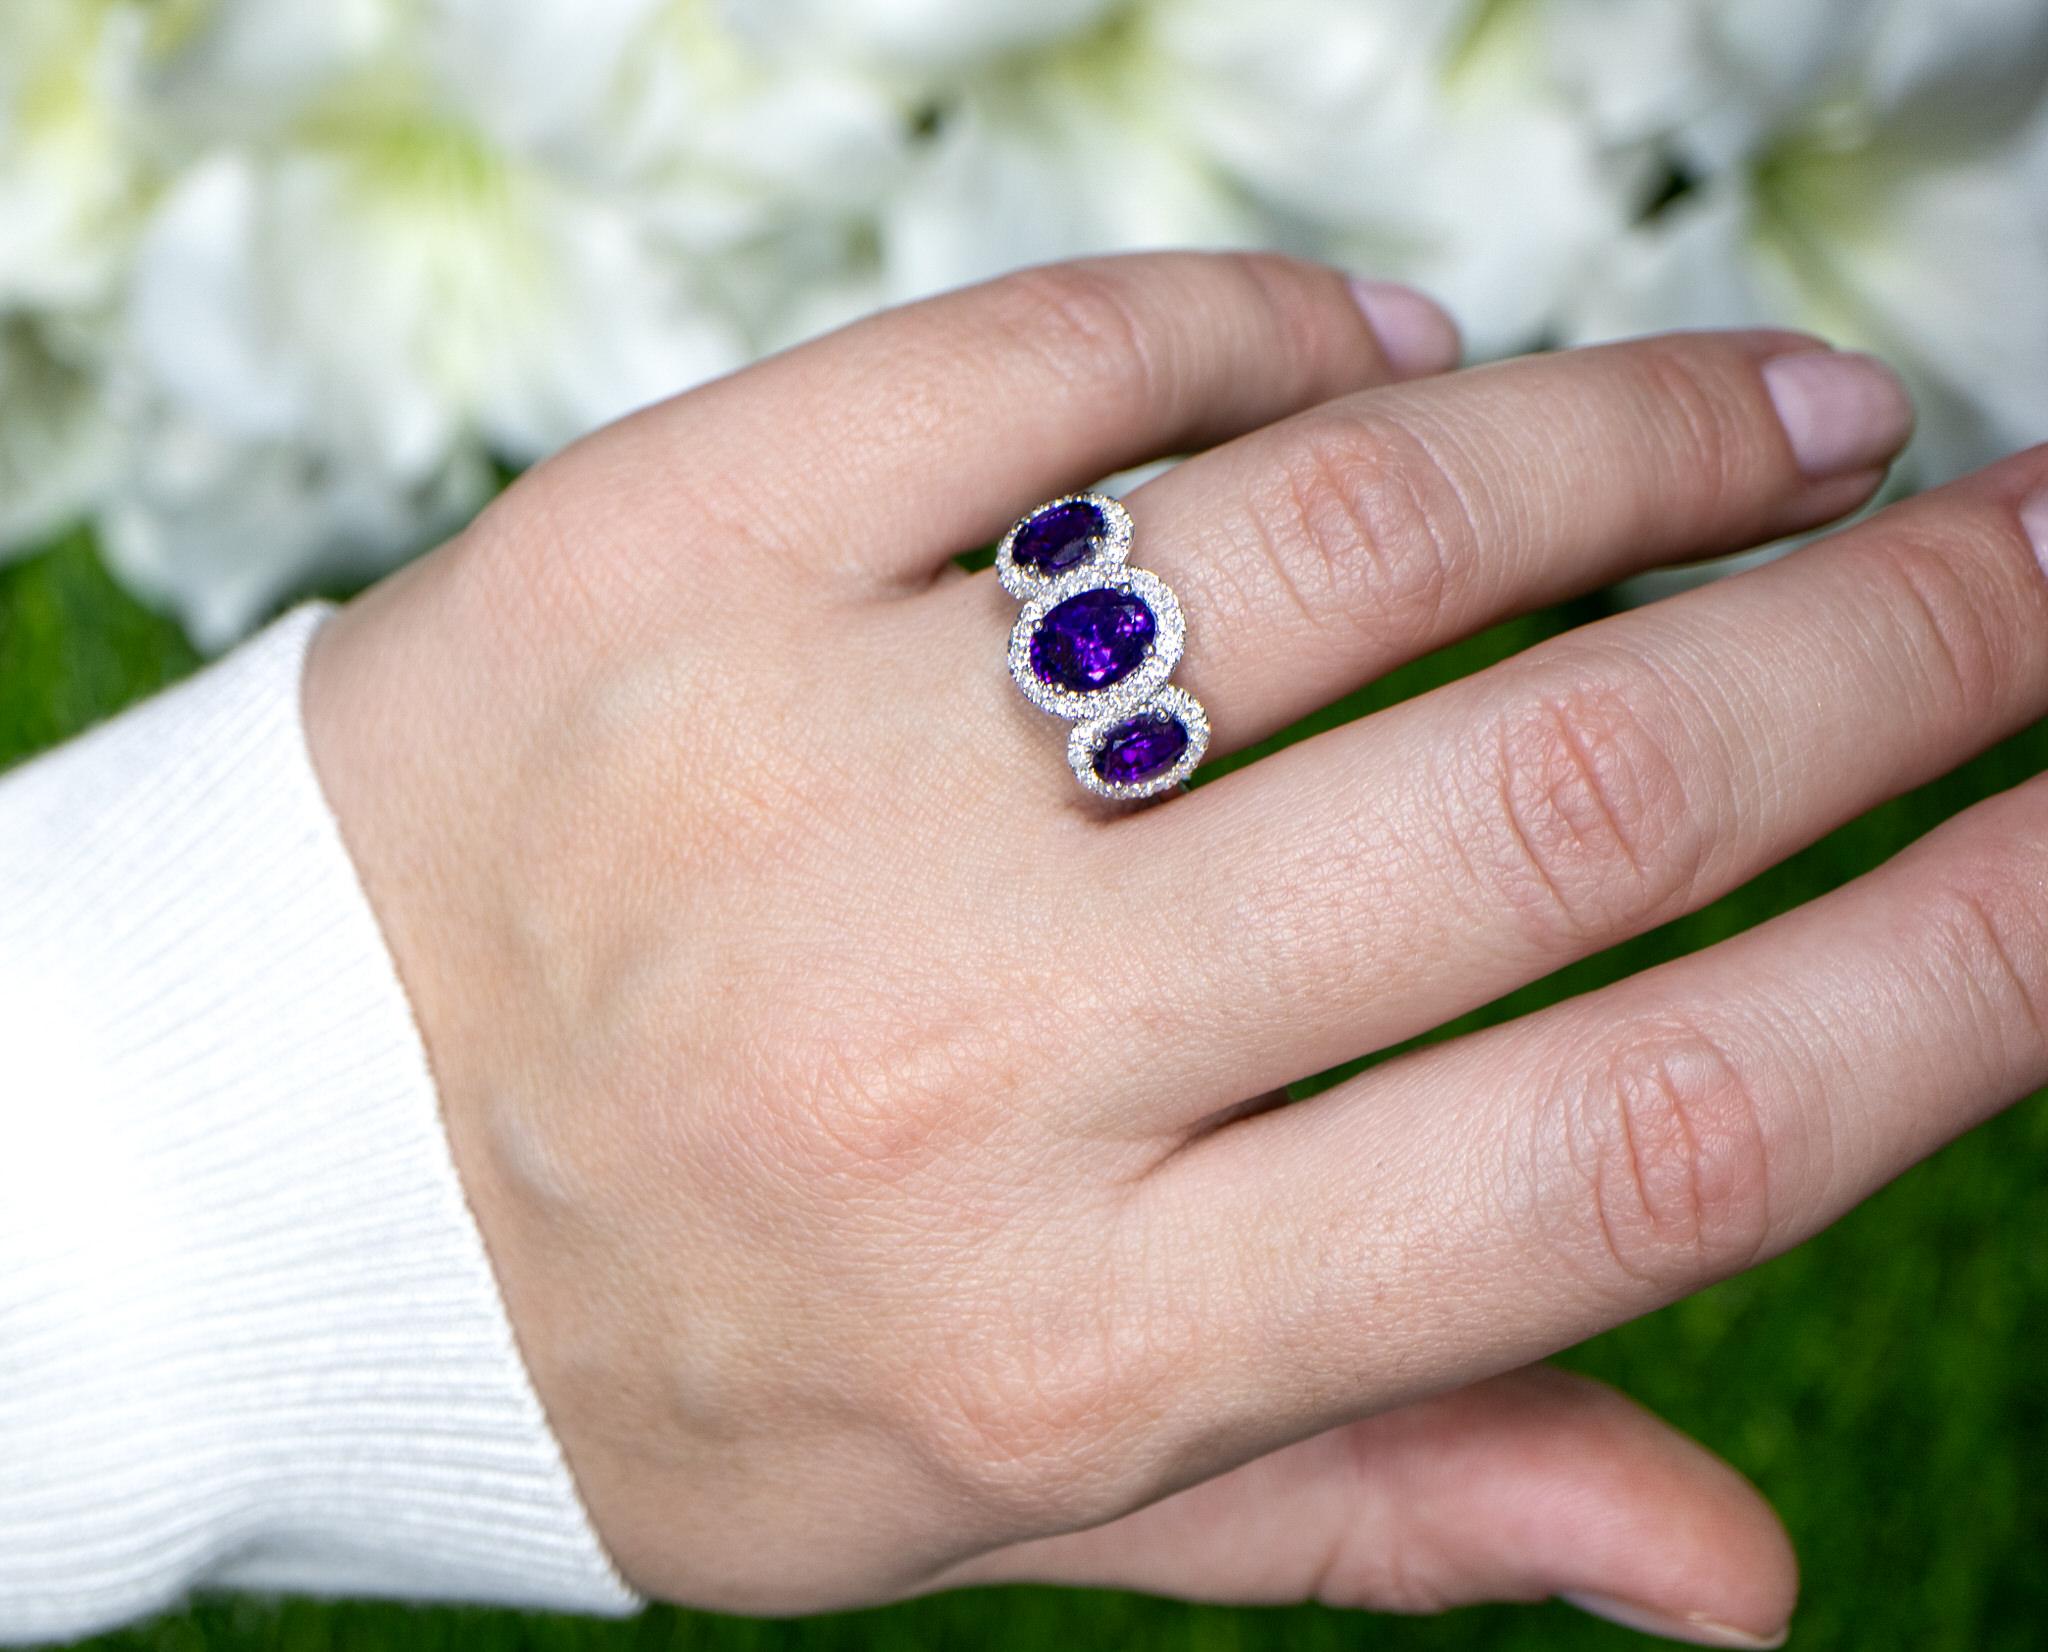 Oval Cut Amethyst Three Stone Ring Diamond Setting 2.48 Carats 18K Gold For Sale